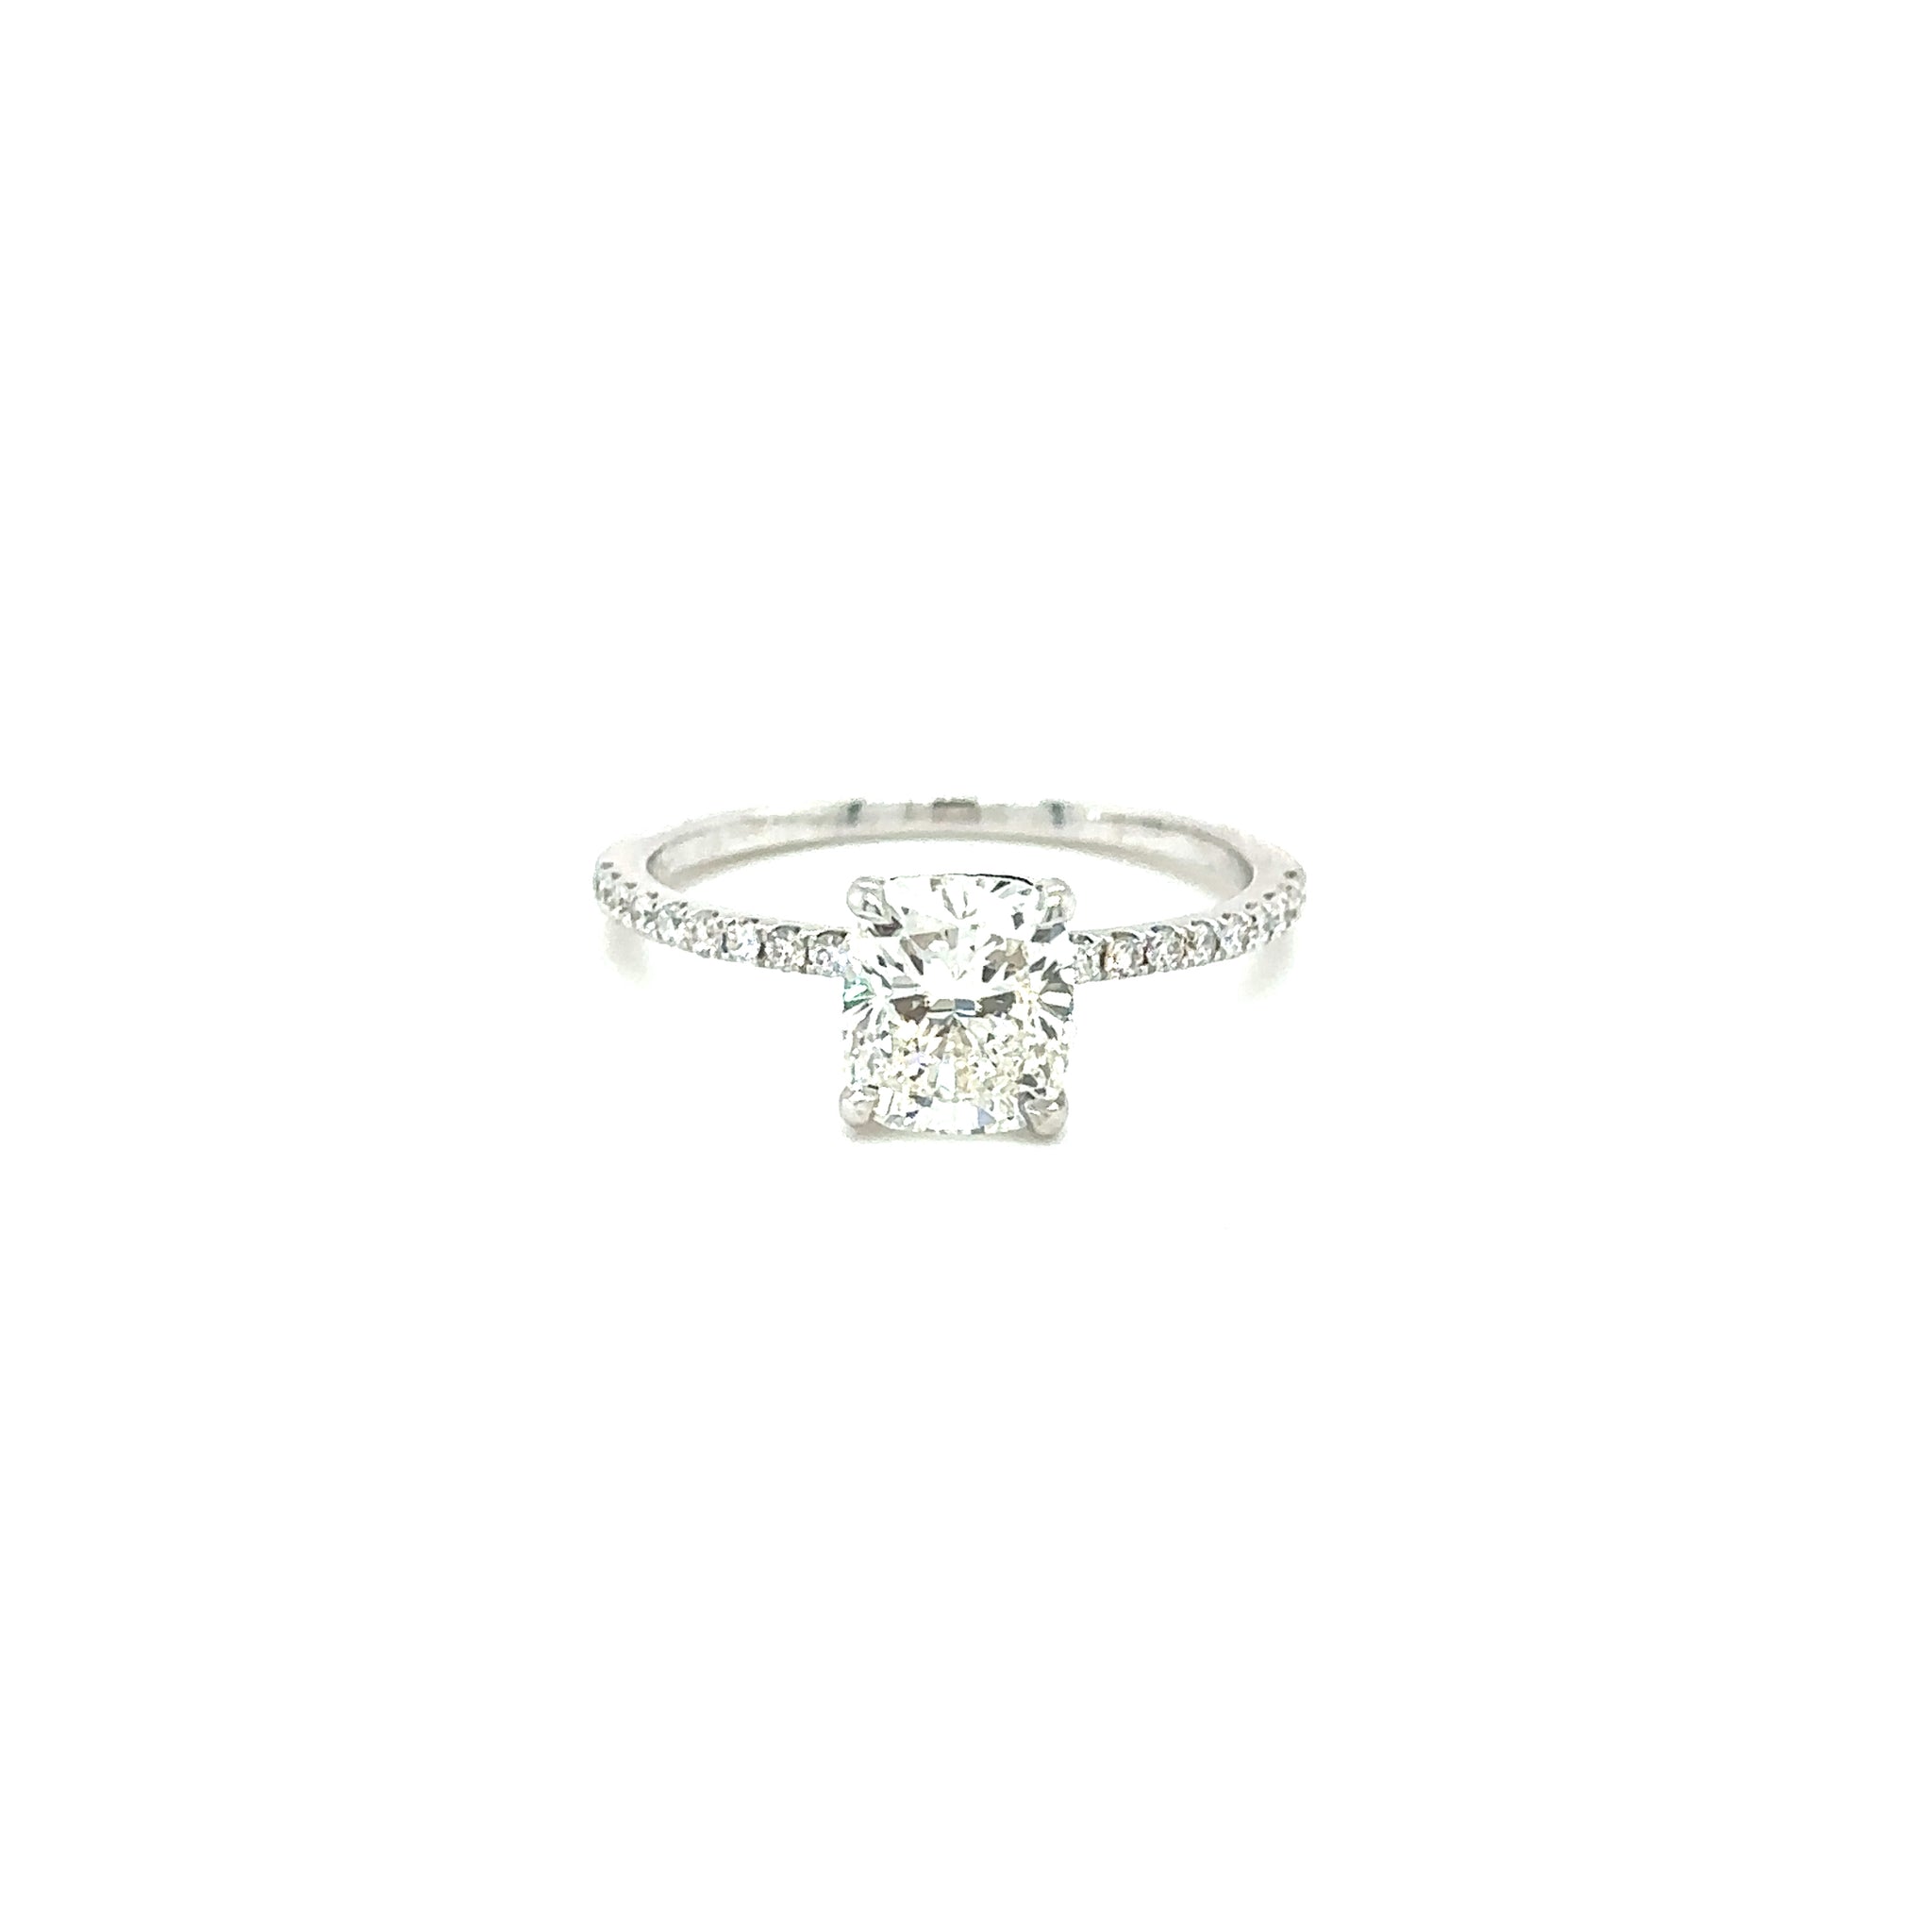 14k White Gold 1.42ct Cushion Diamond Ultra Thin Pave Solitaire Ring